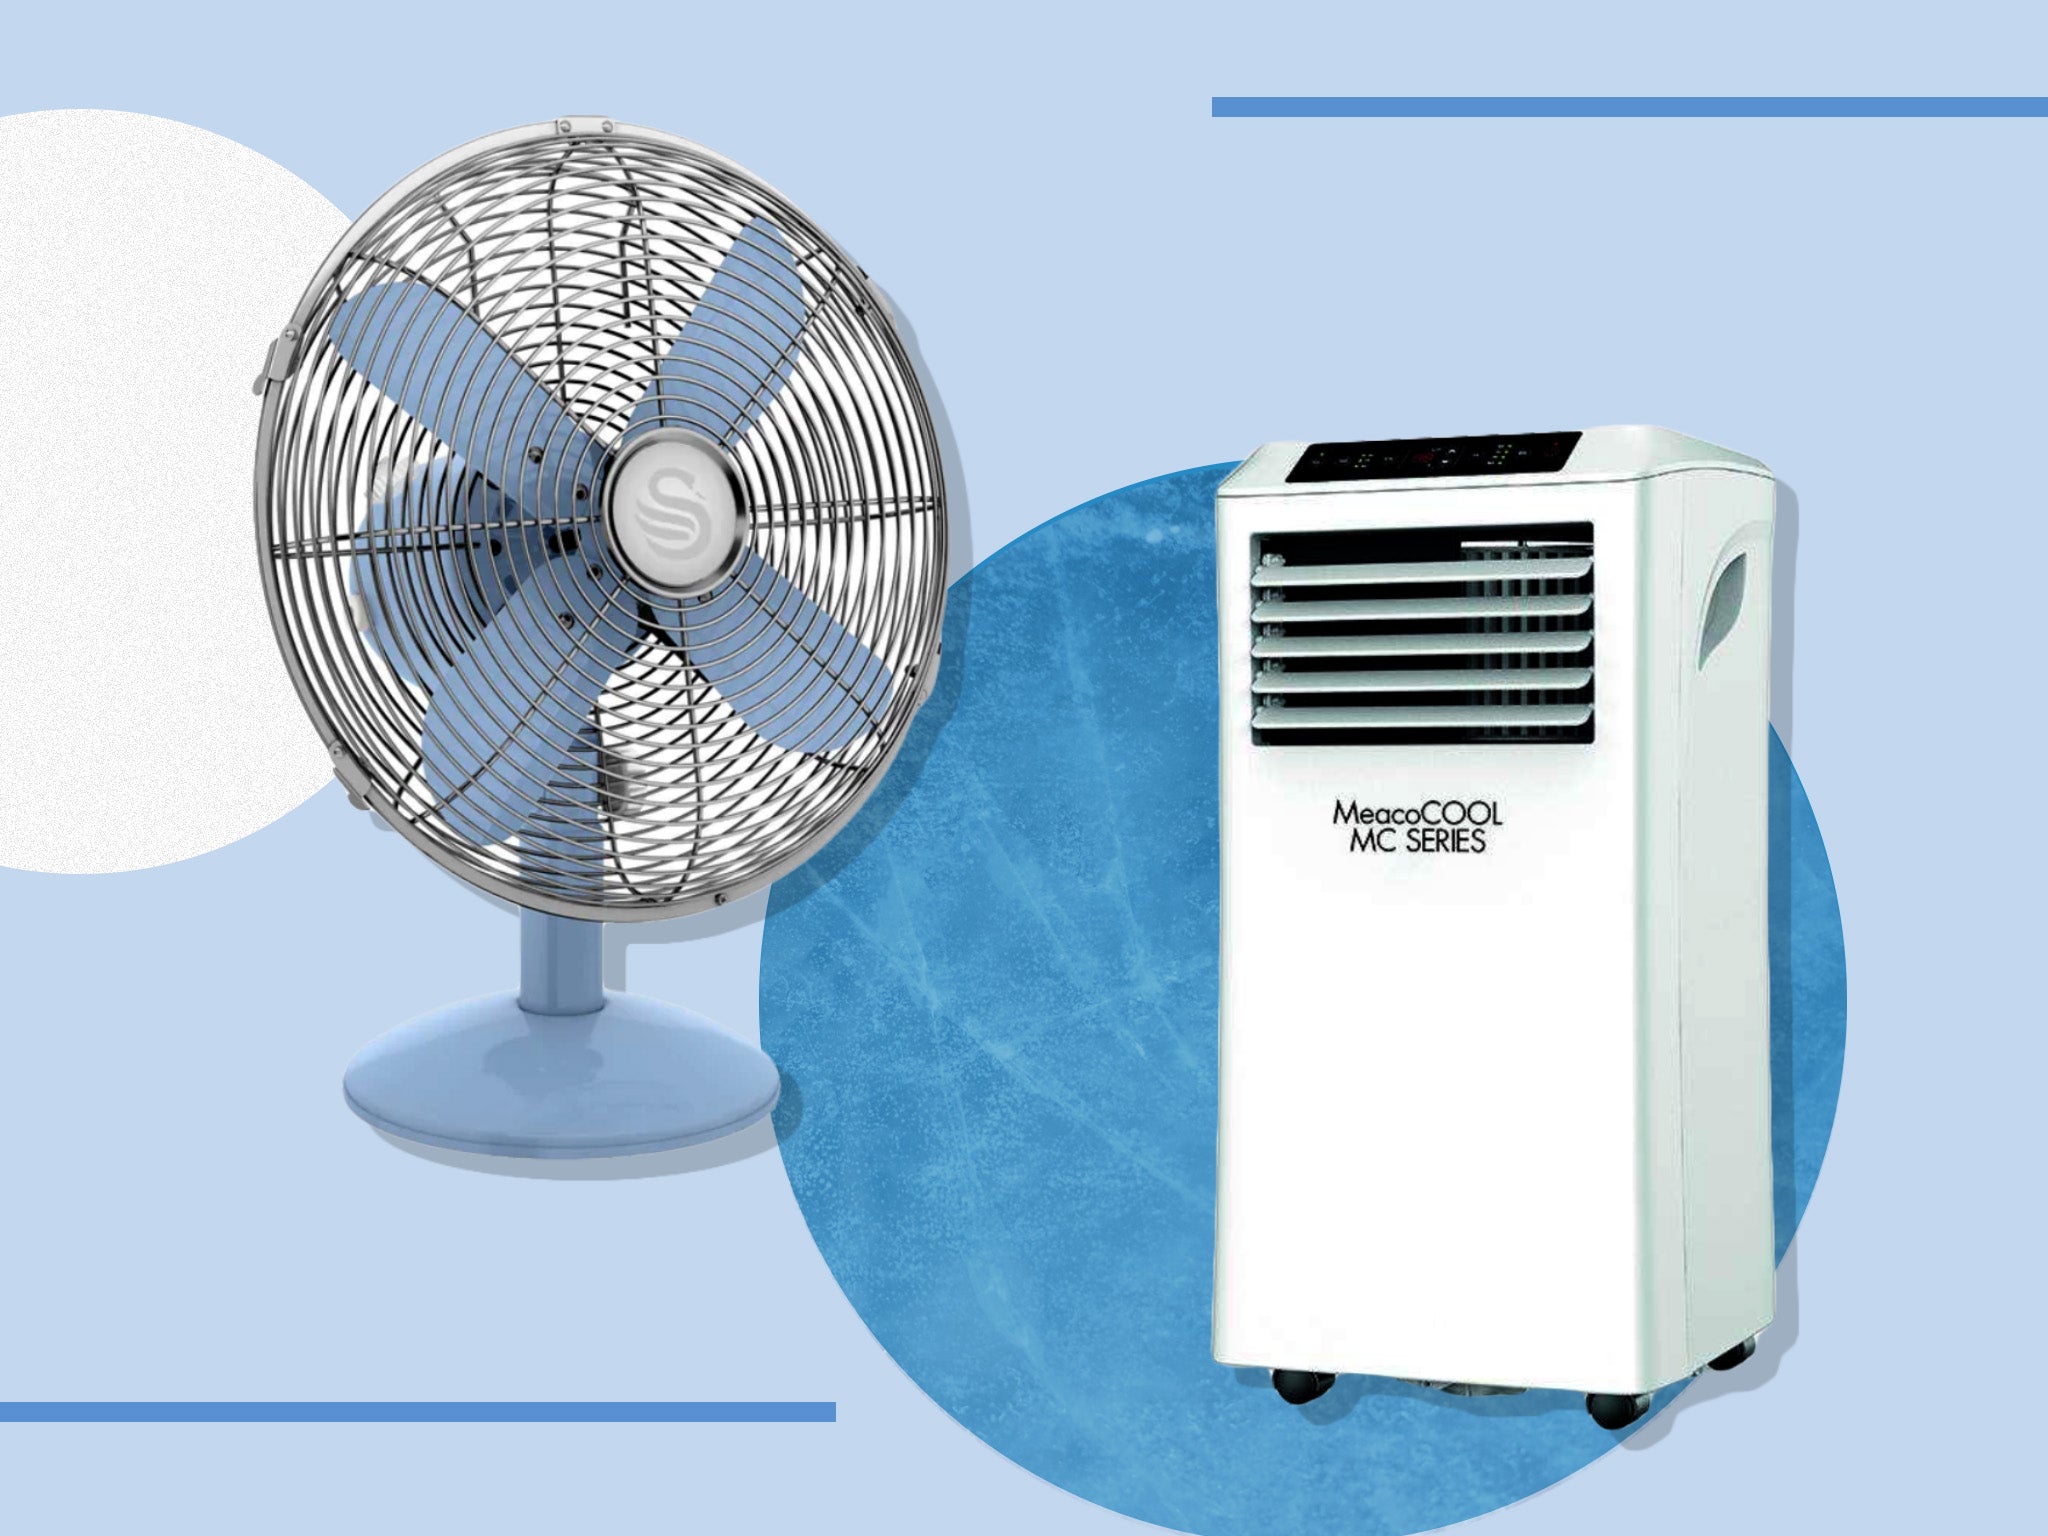 Does a dehumidifier make a room cooler Experts explain how yours could help beat the heat